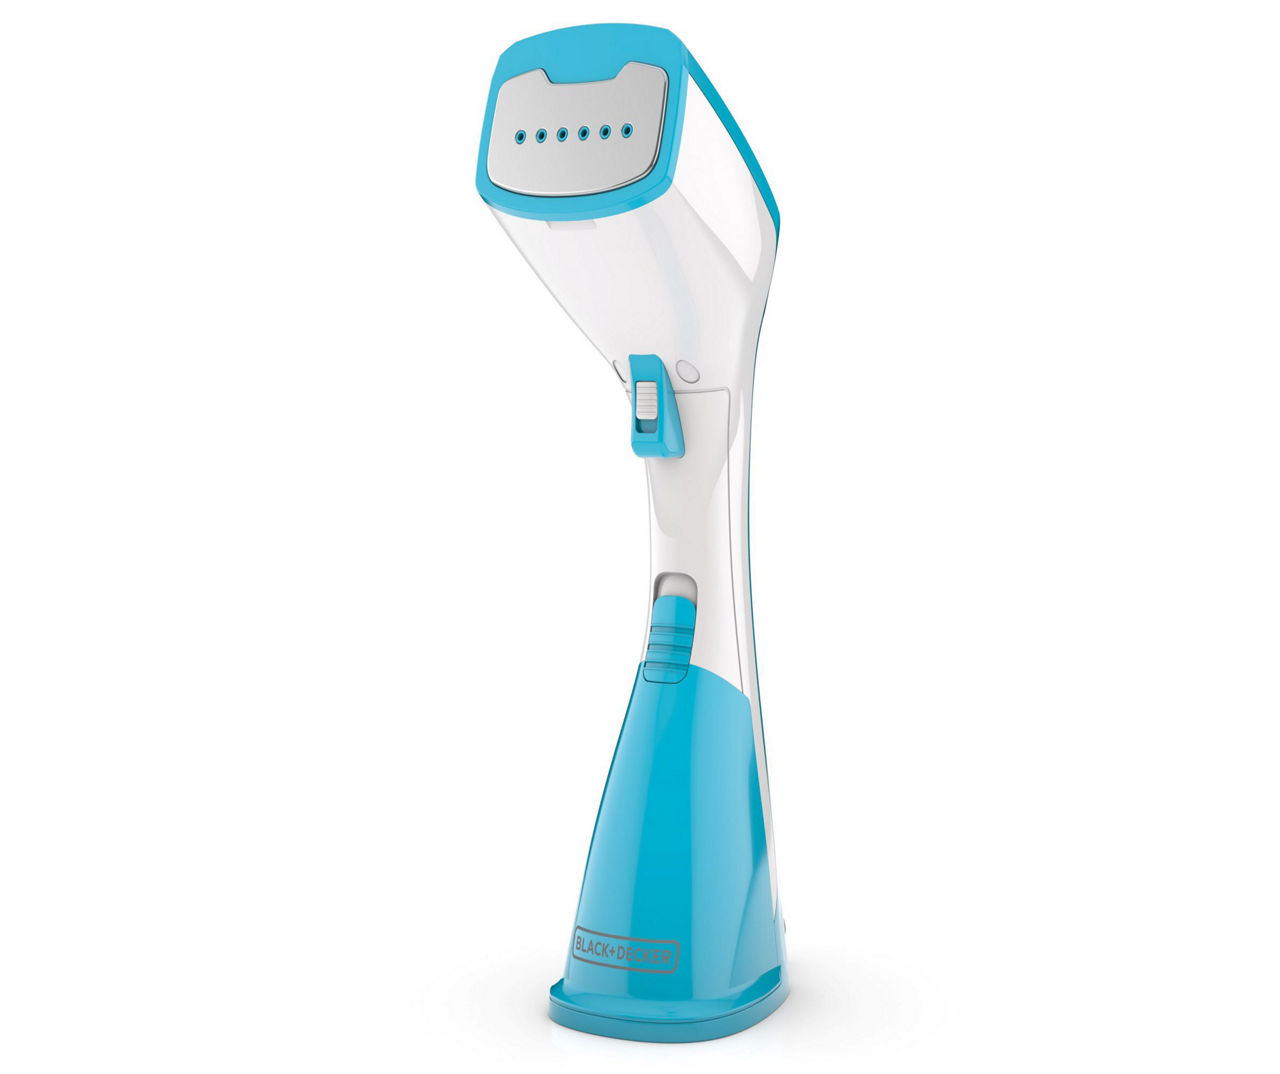  BLACK+DECKER Easy Garment Steamer - Powerful and Quick handheld  Steam Solution for clothing and fabric, Wide steam head for full  coverage,Blue: Home & Kitchen